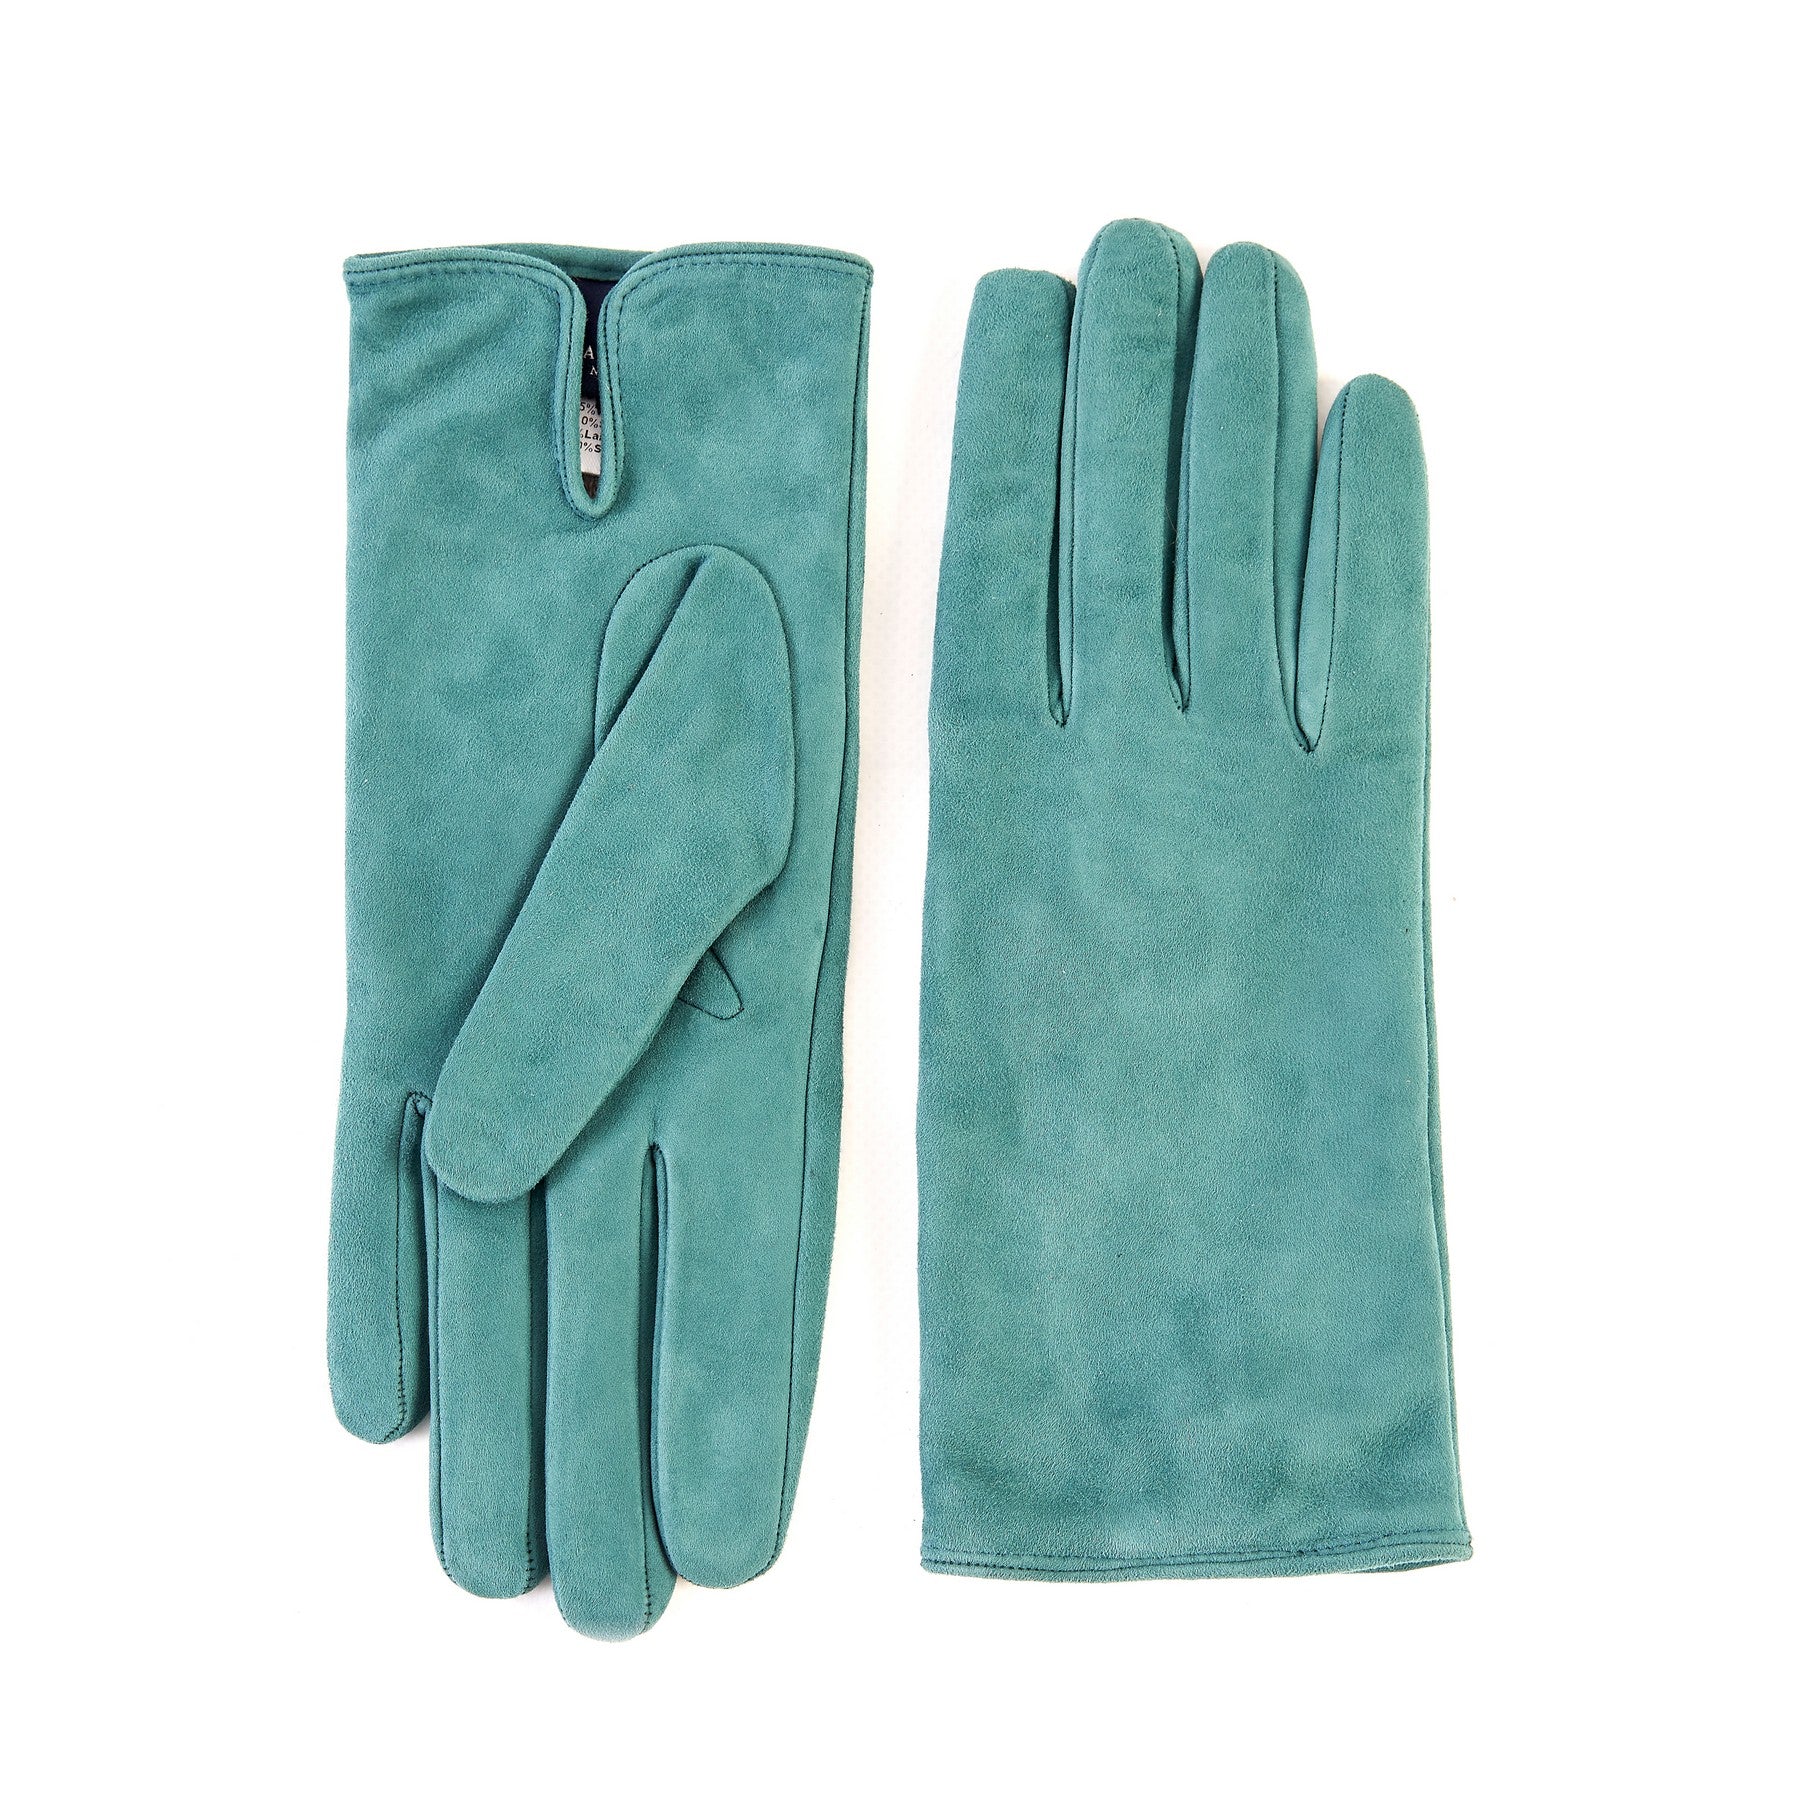 Women’s basic green soft suede leather gloves with palm opening and mix cashmere lining